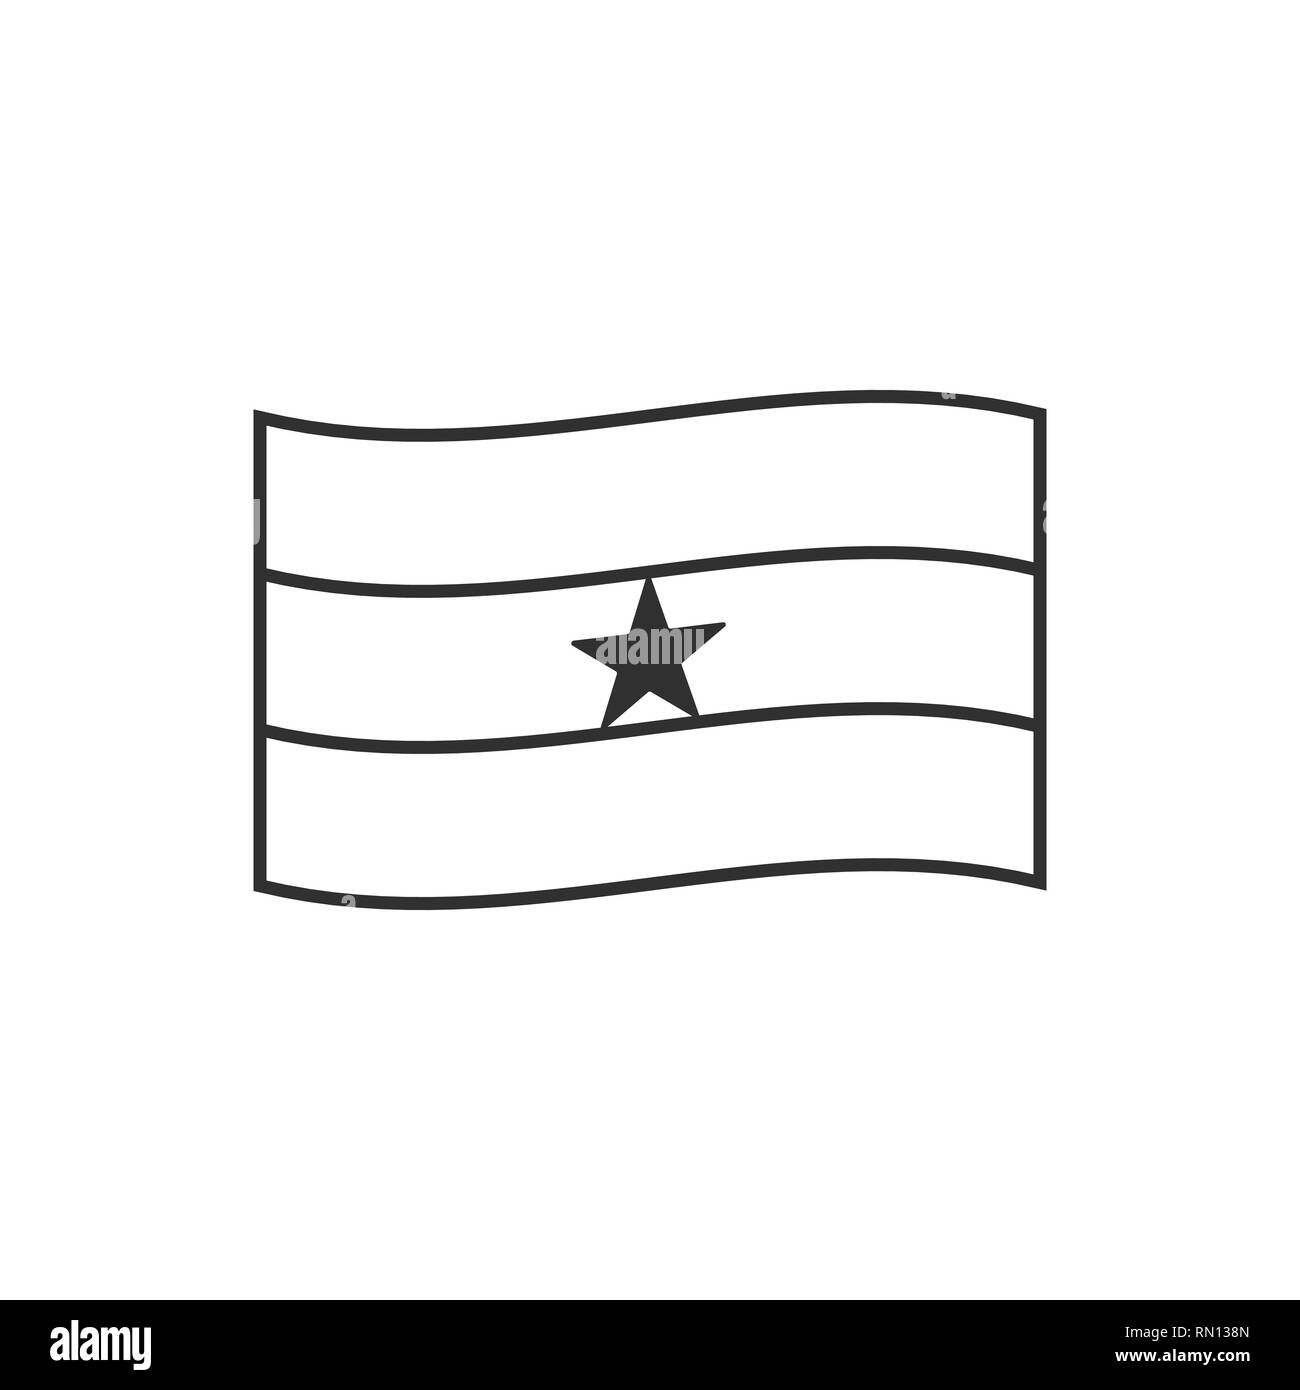 Ghana flag icon in black outline flat design. Independence day or National day holiday concept. Stock Vector